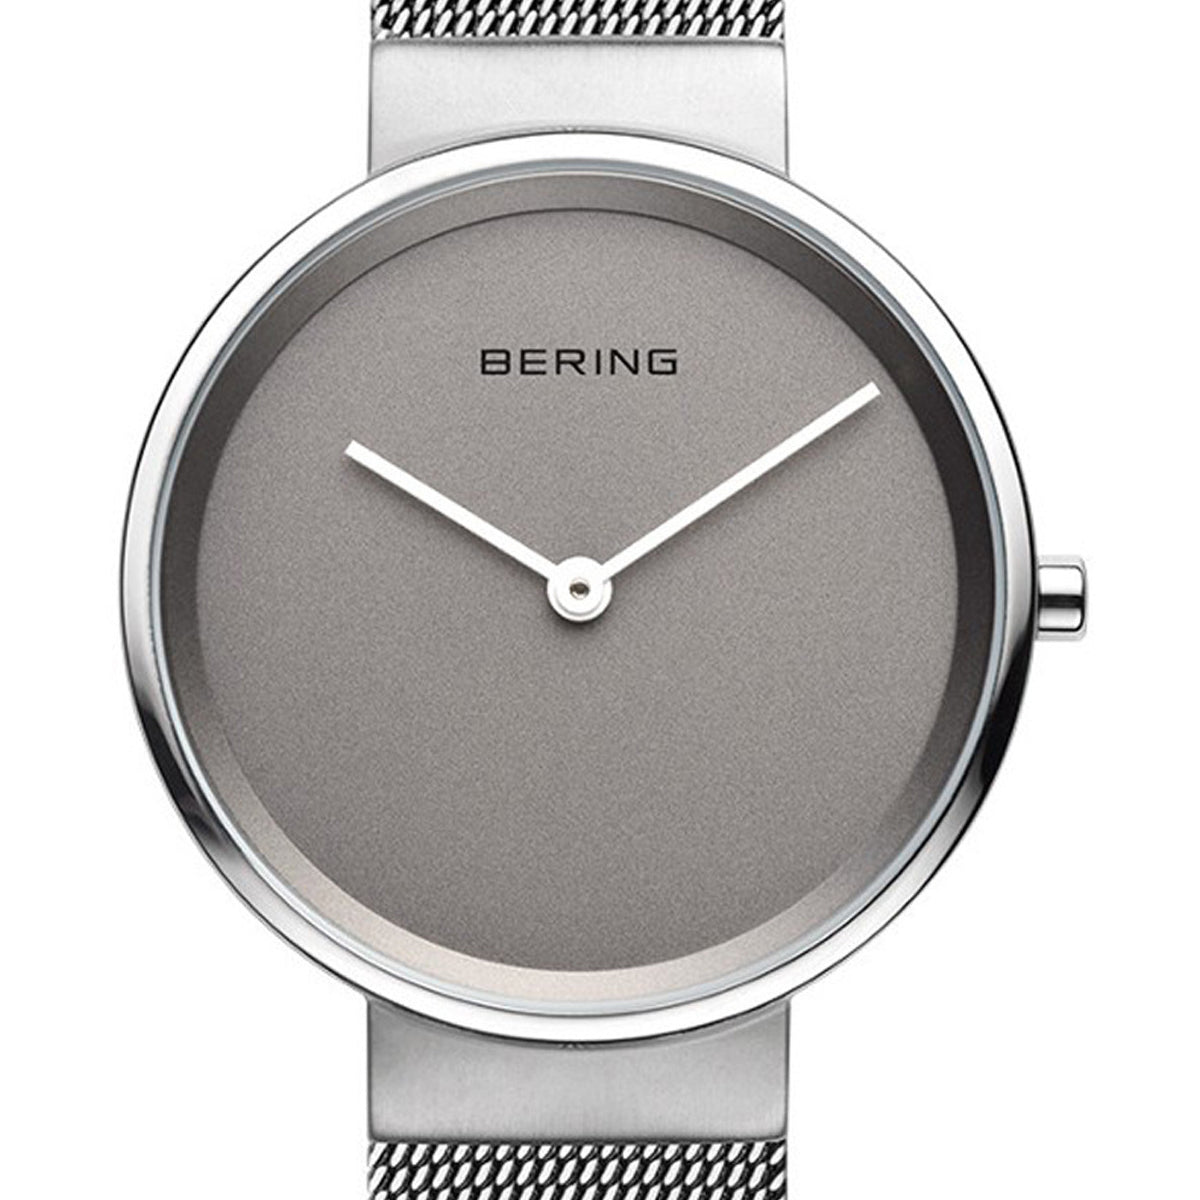 Bering Time Classic Silver Steel Case and Grey Strap Women's Watch. 14531-077